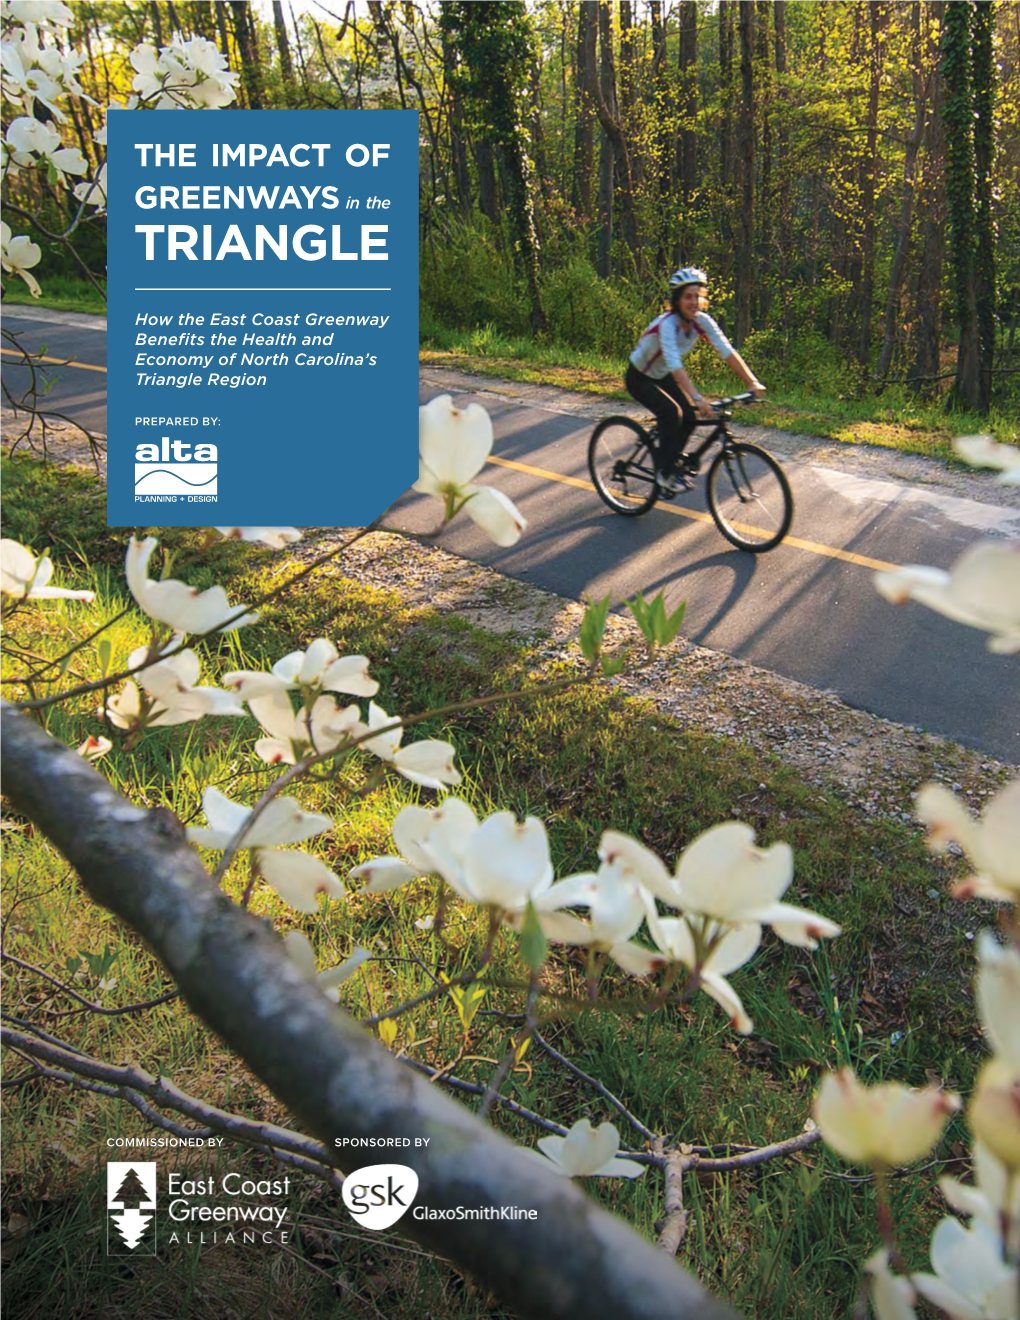 THE IMPACT of GREENWAYS in the TRIANGLE